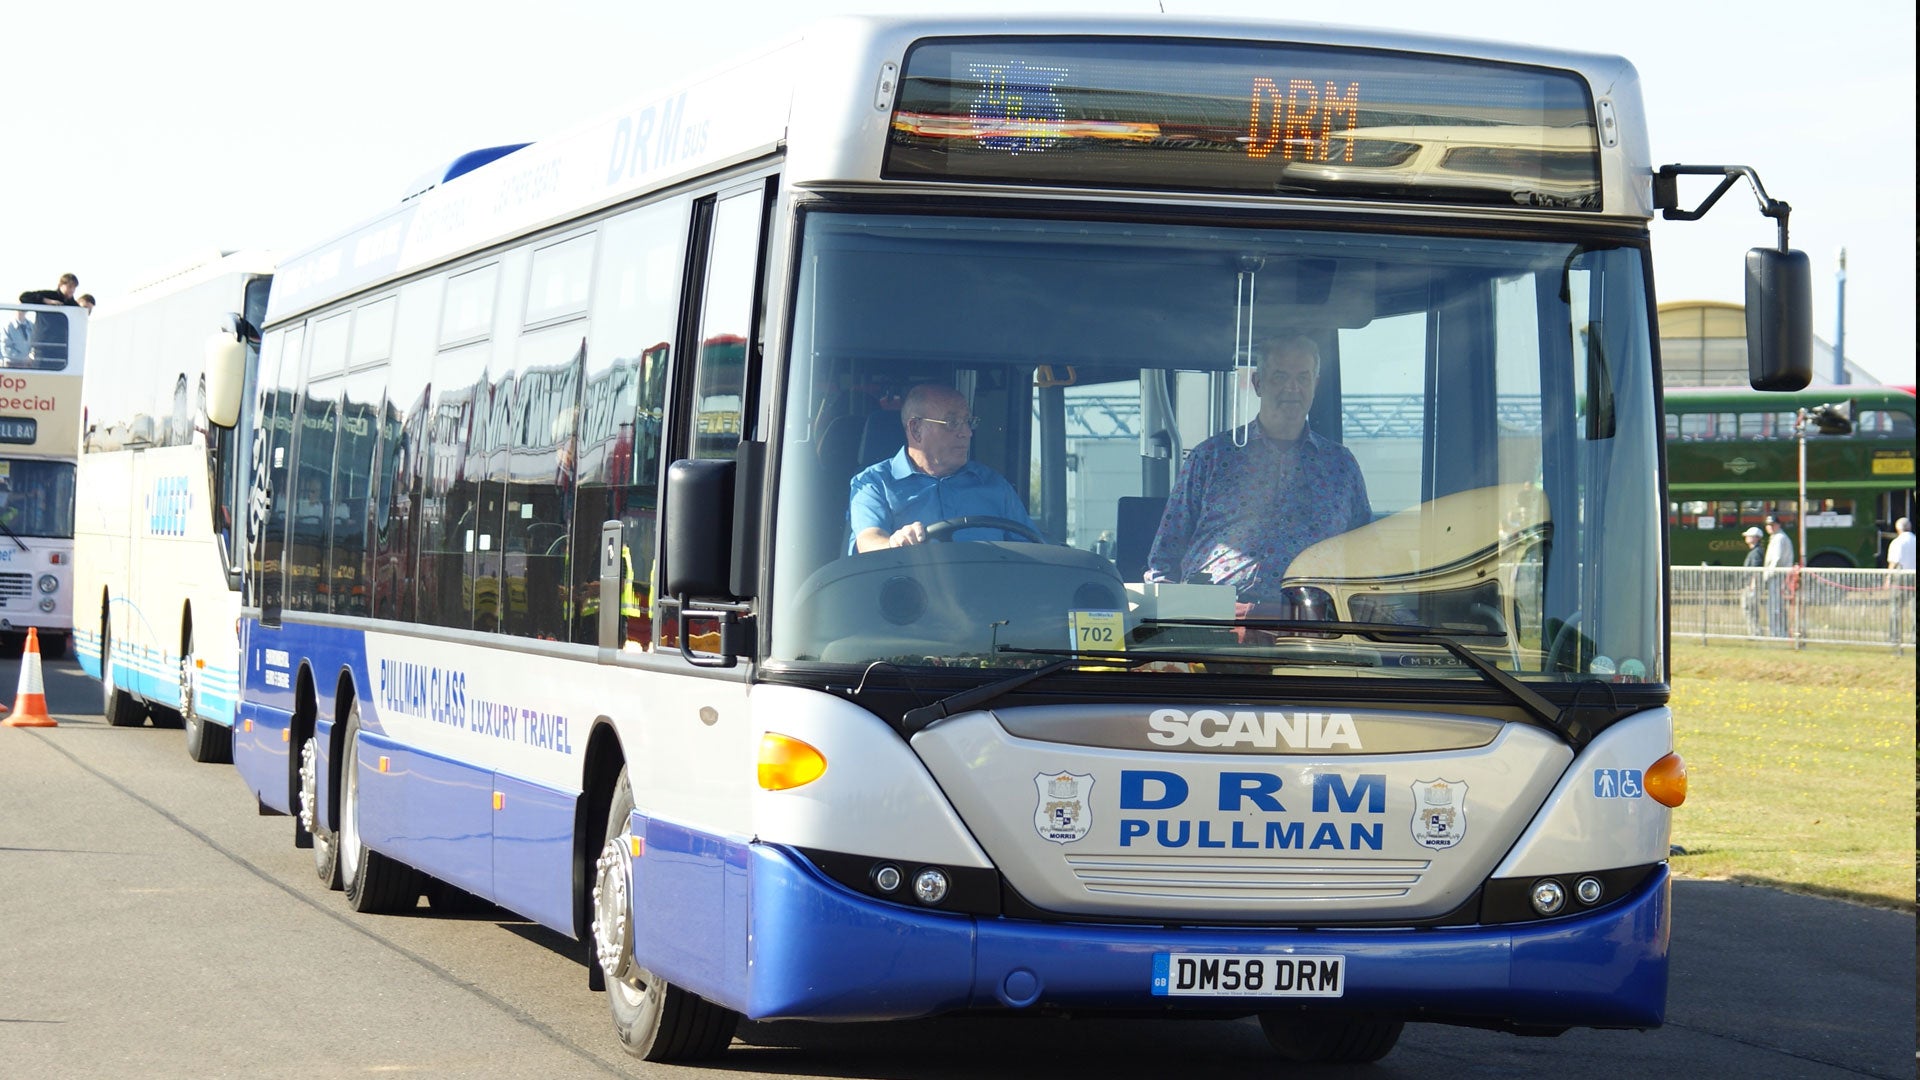 DRM buses have 7% fuel saving in the first 3 weeks!